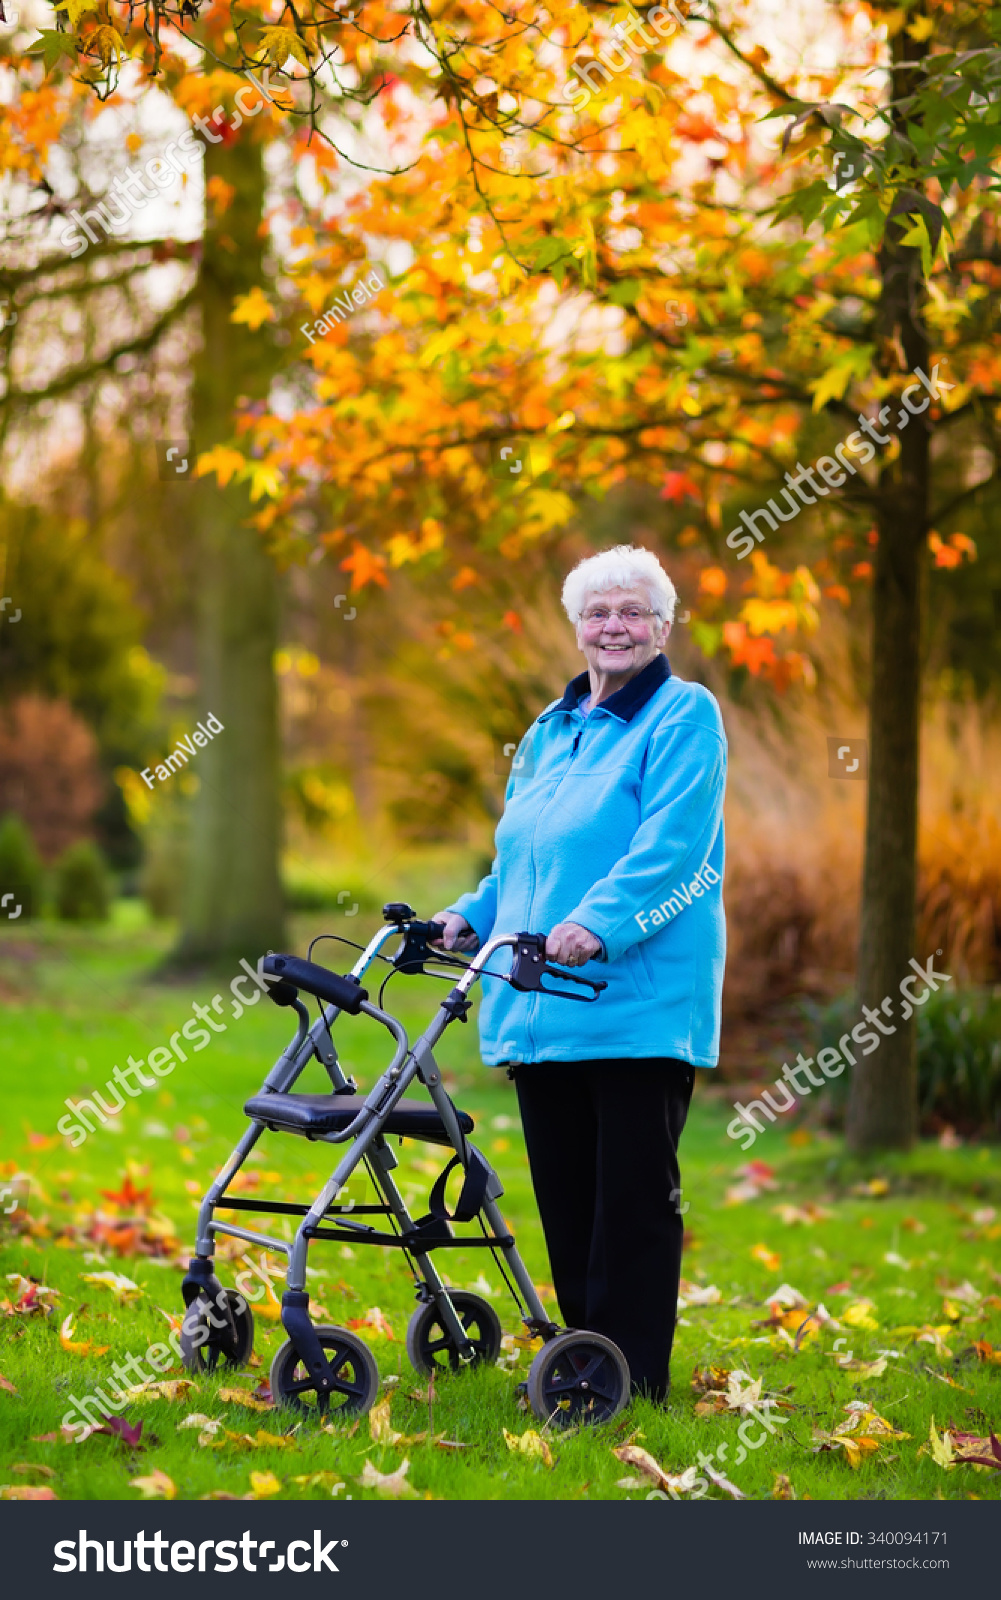 Happy Senior Handicapped Lady With A Walking Disability Enjoying A Walk ...